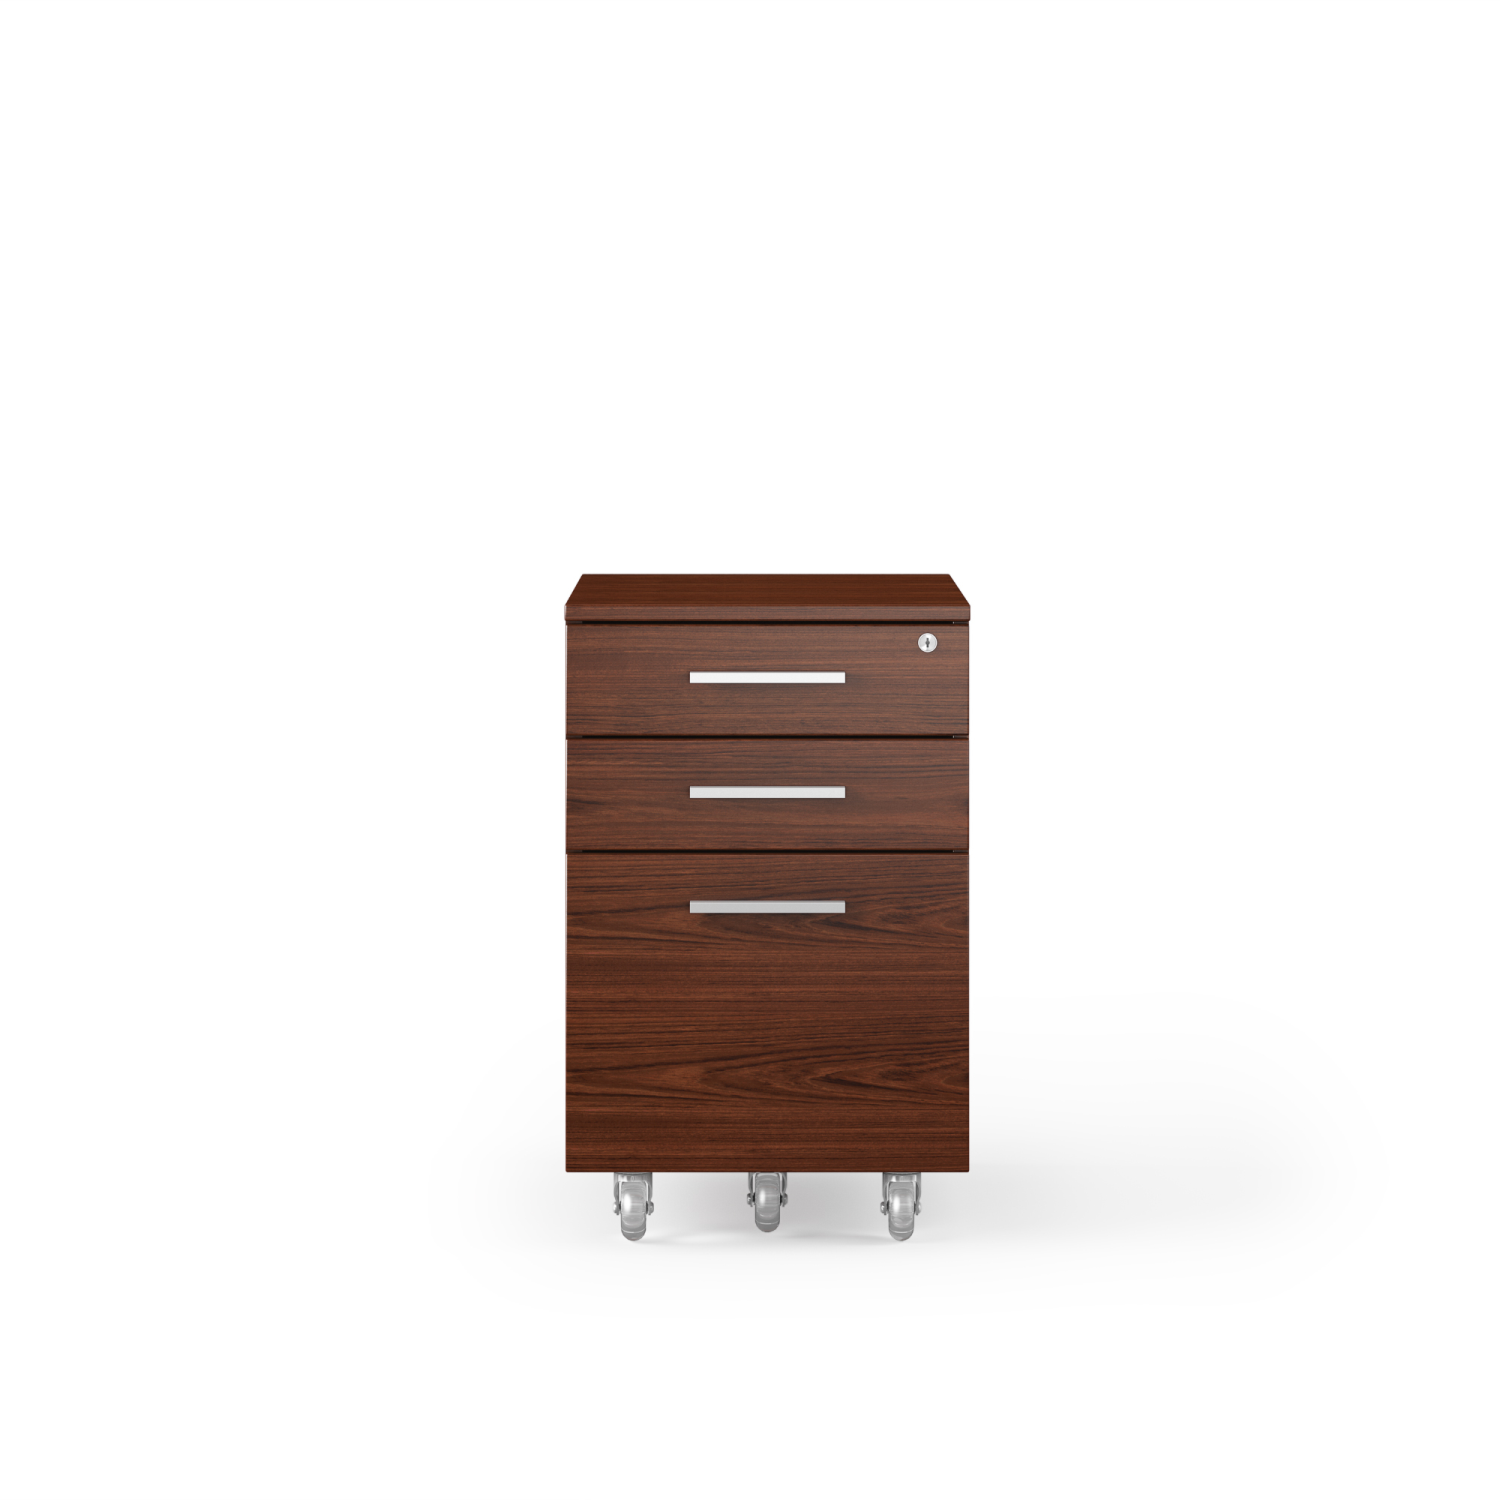 Sequel 20 mobile file cabinet front view